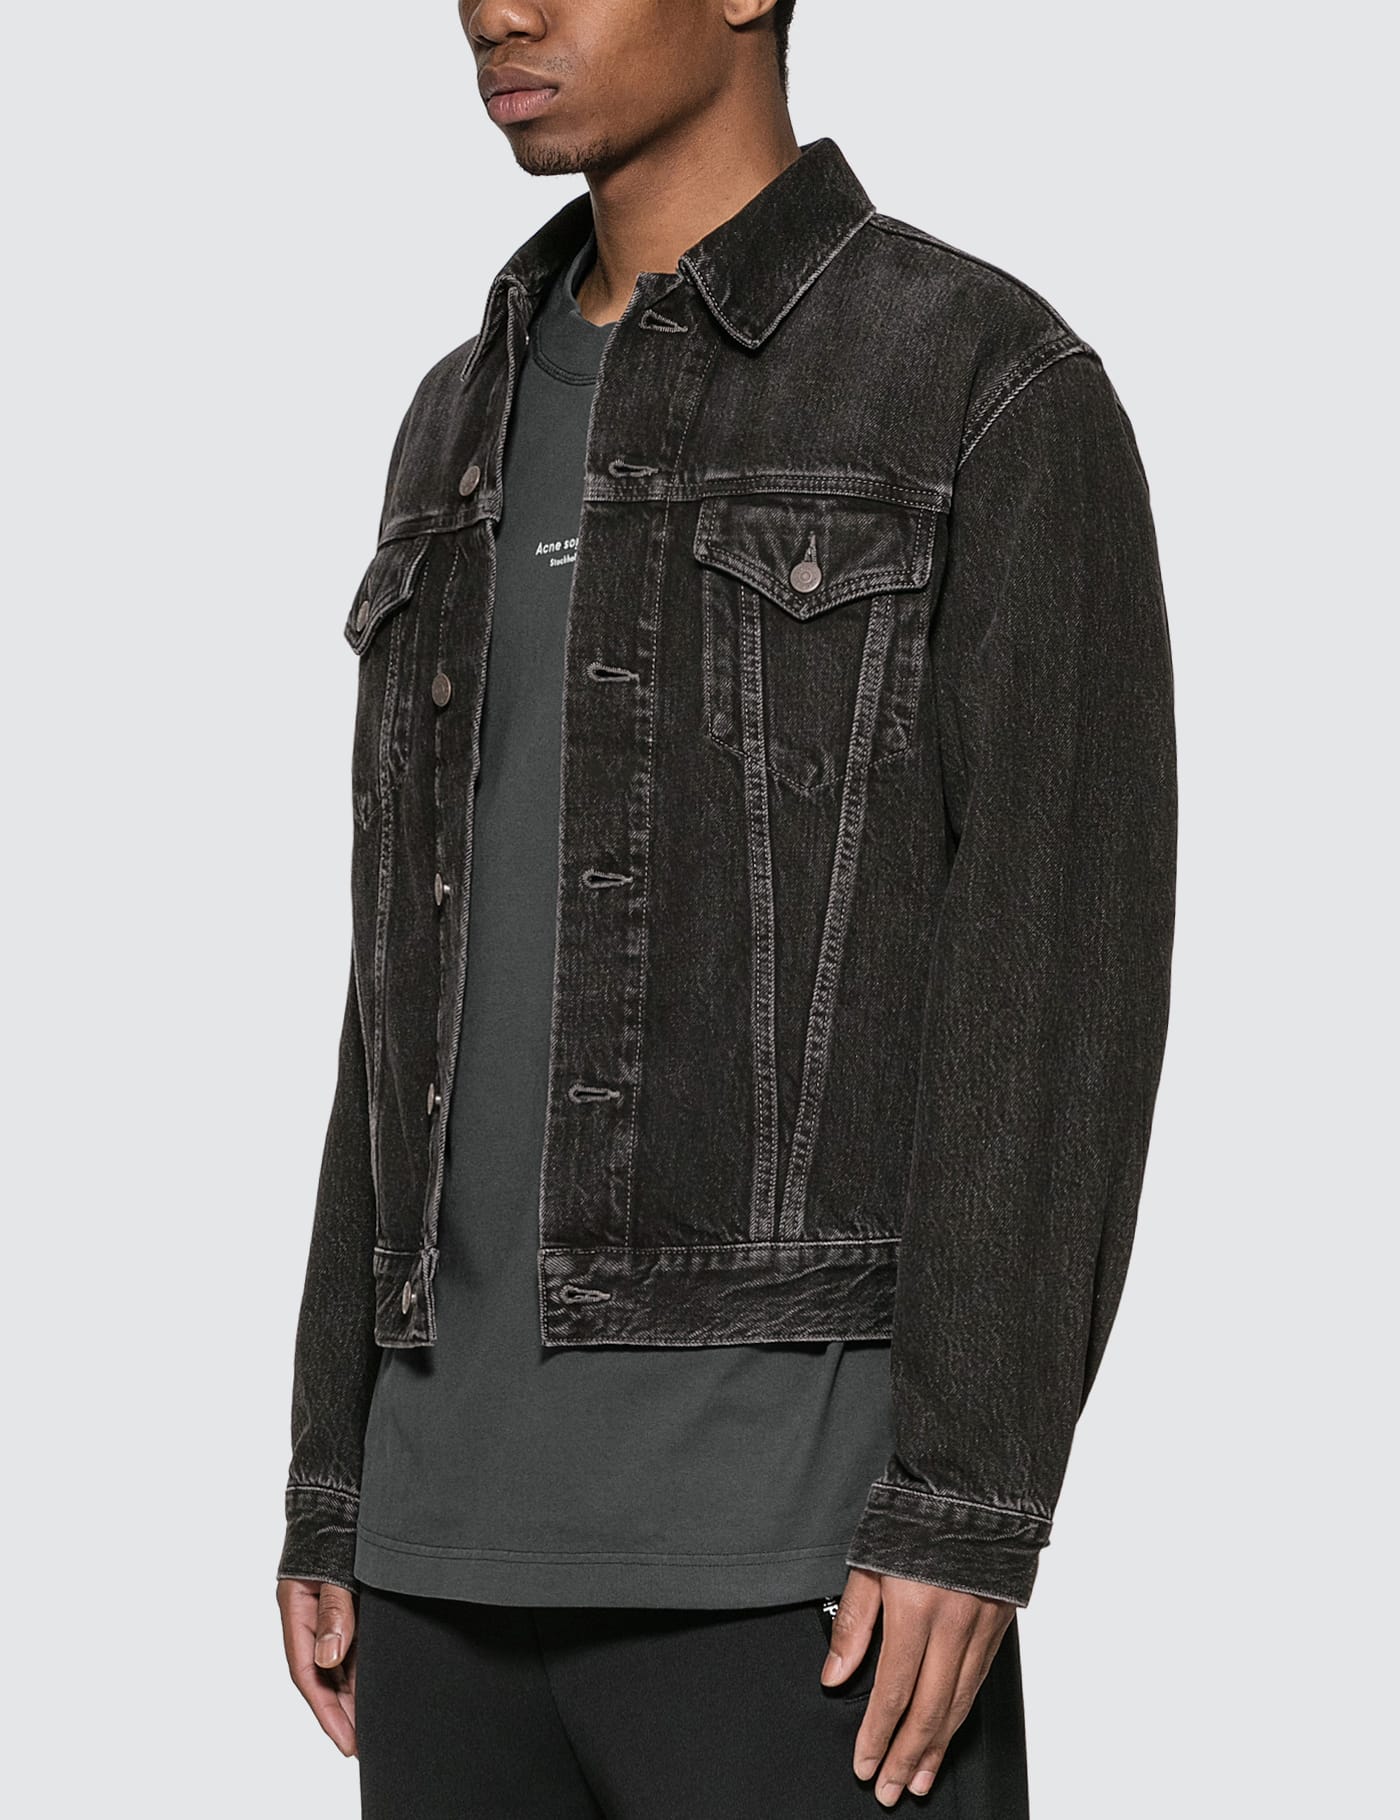 Acne Studios - Trash 1998 Denim Jacket | HBX - Globally Curated Fashion and  Lifestyle by Hypebeast